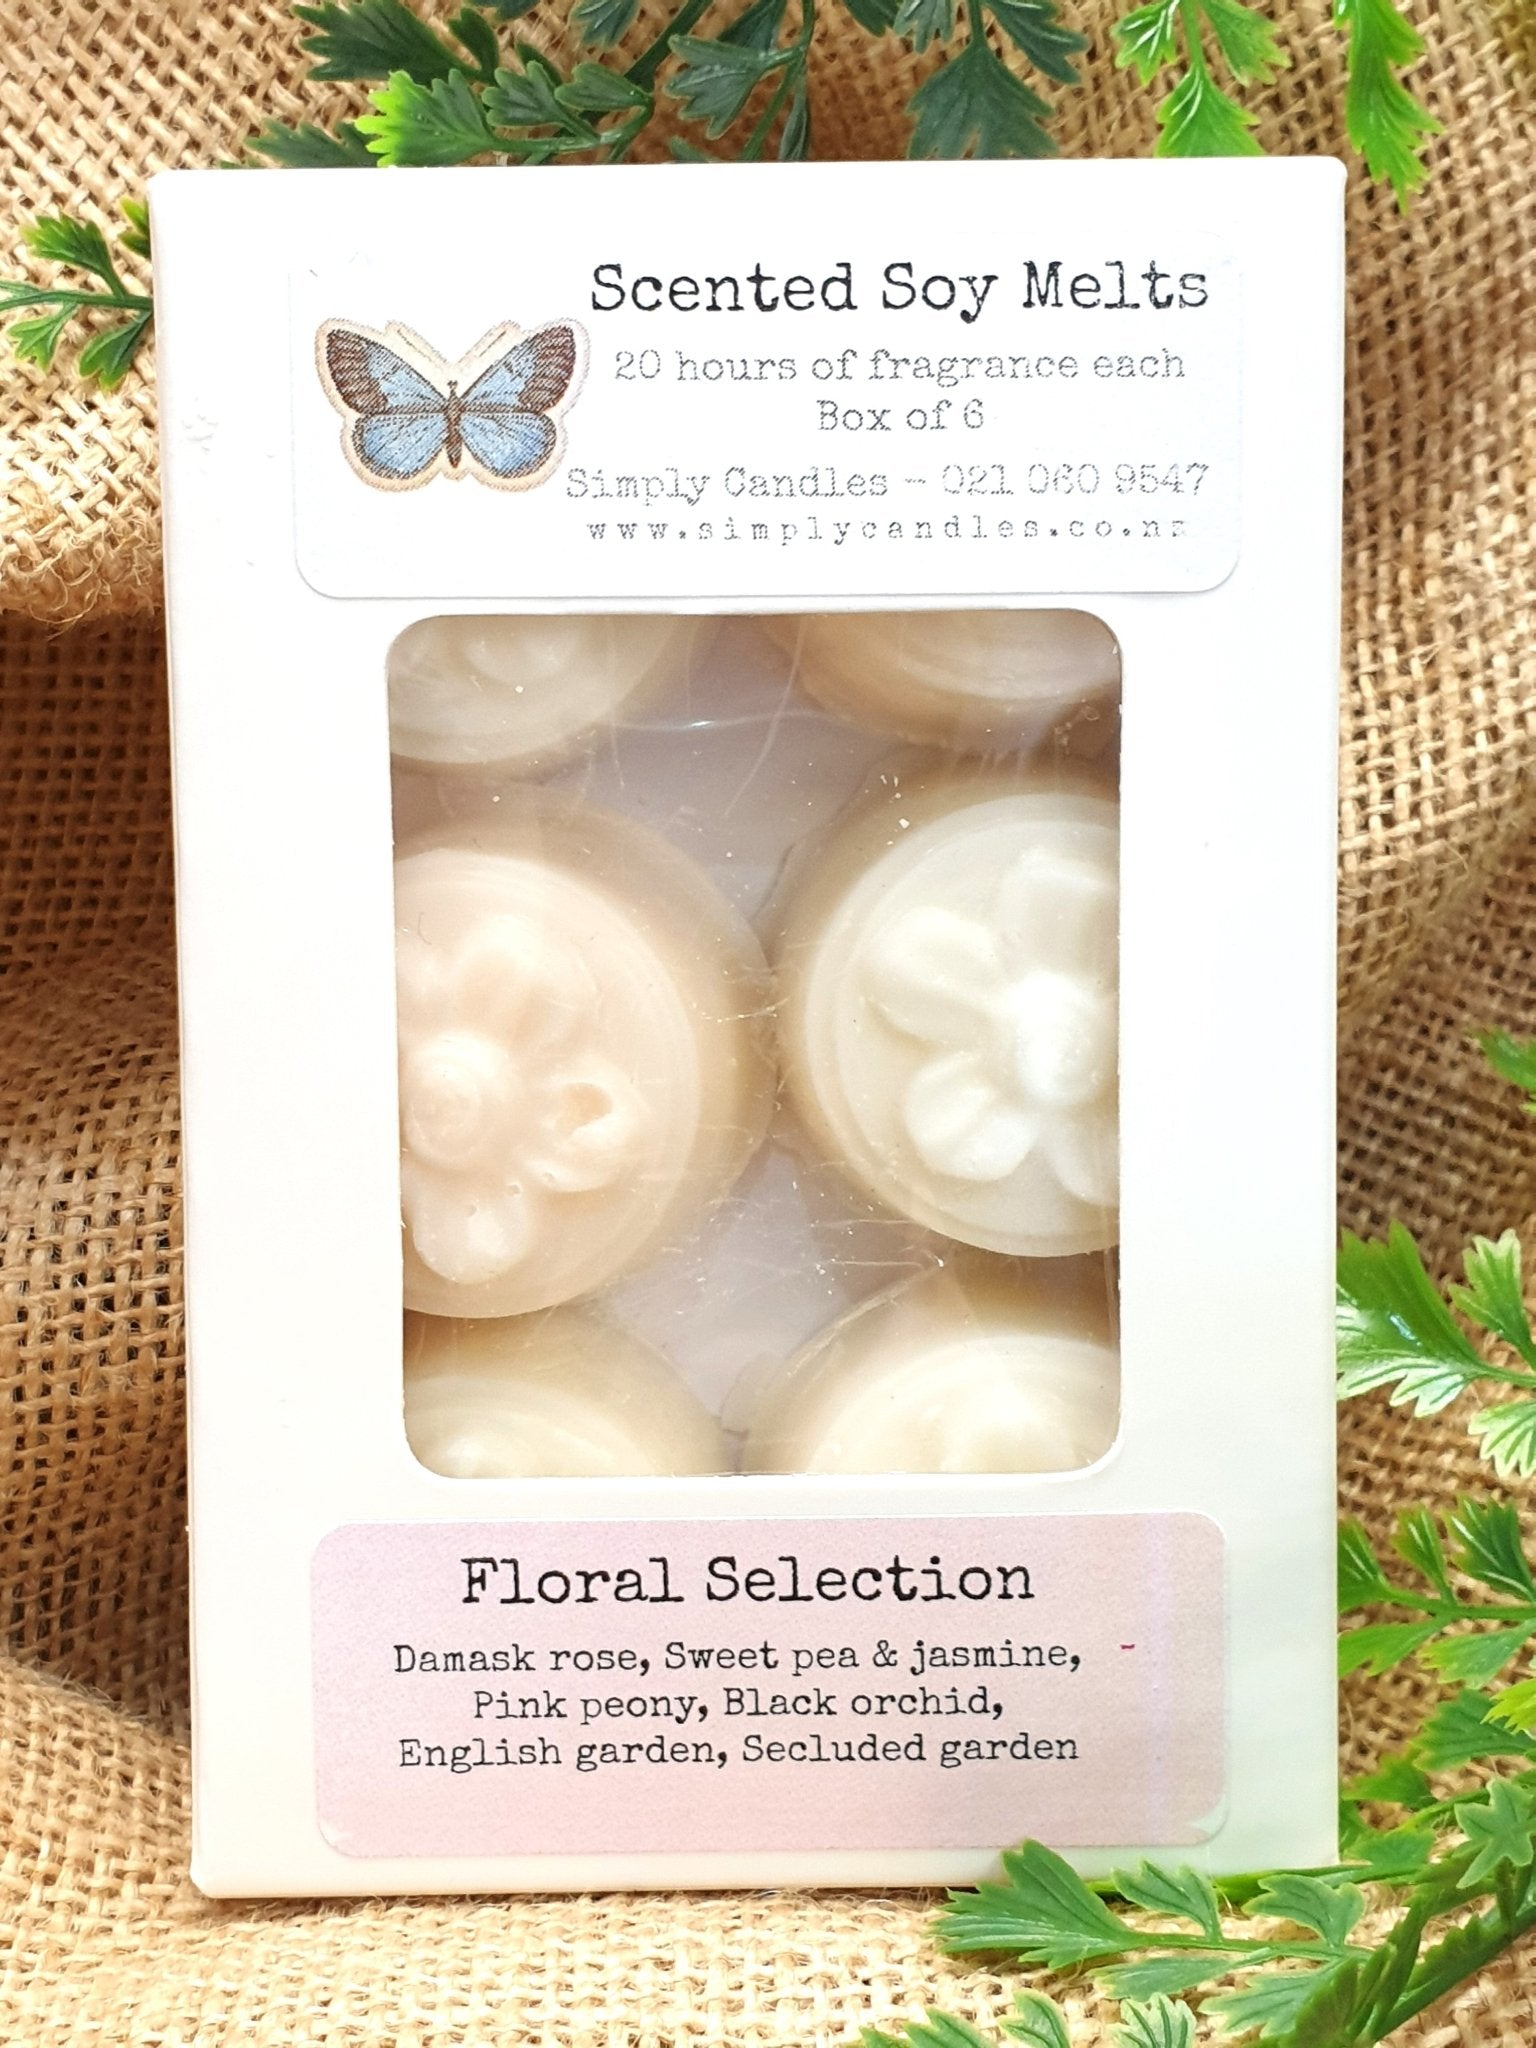 Scented soy melts - Simply Candles